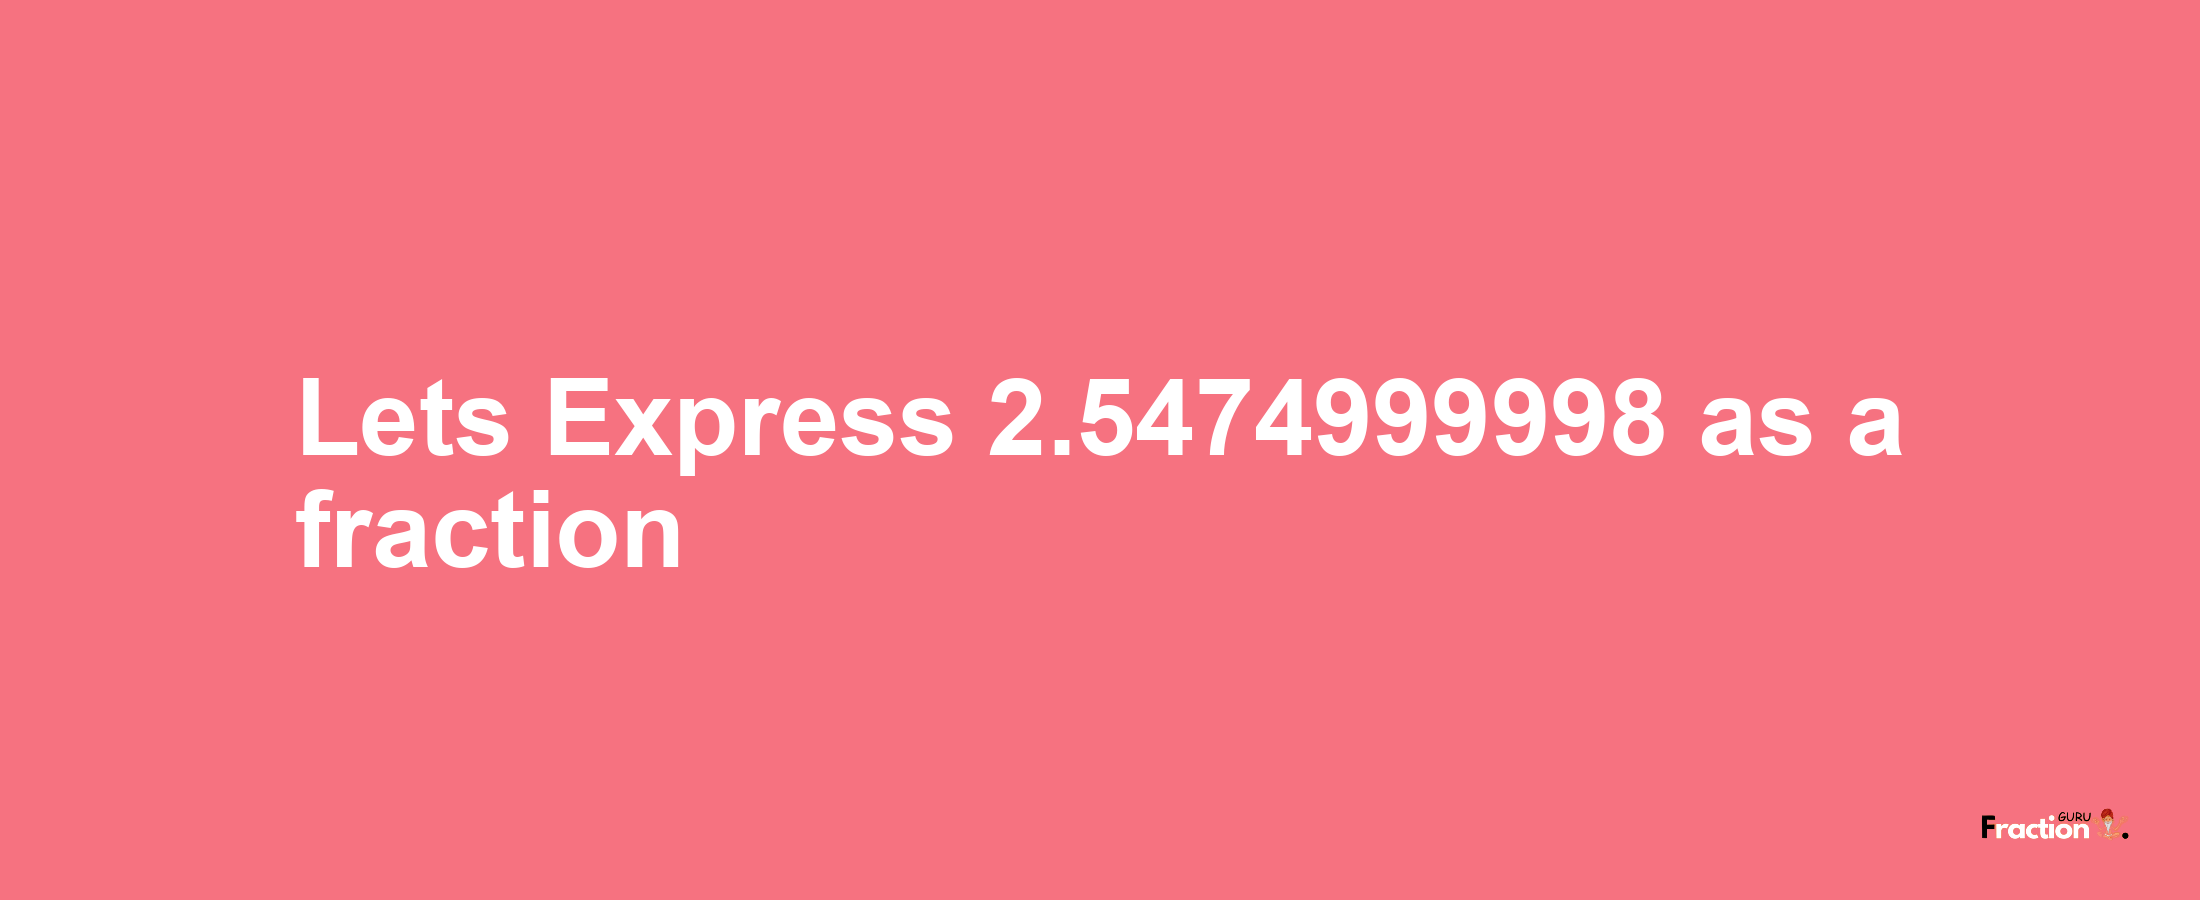 Lets Express 2.5474999998 as afraction